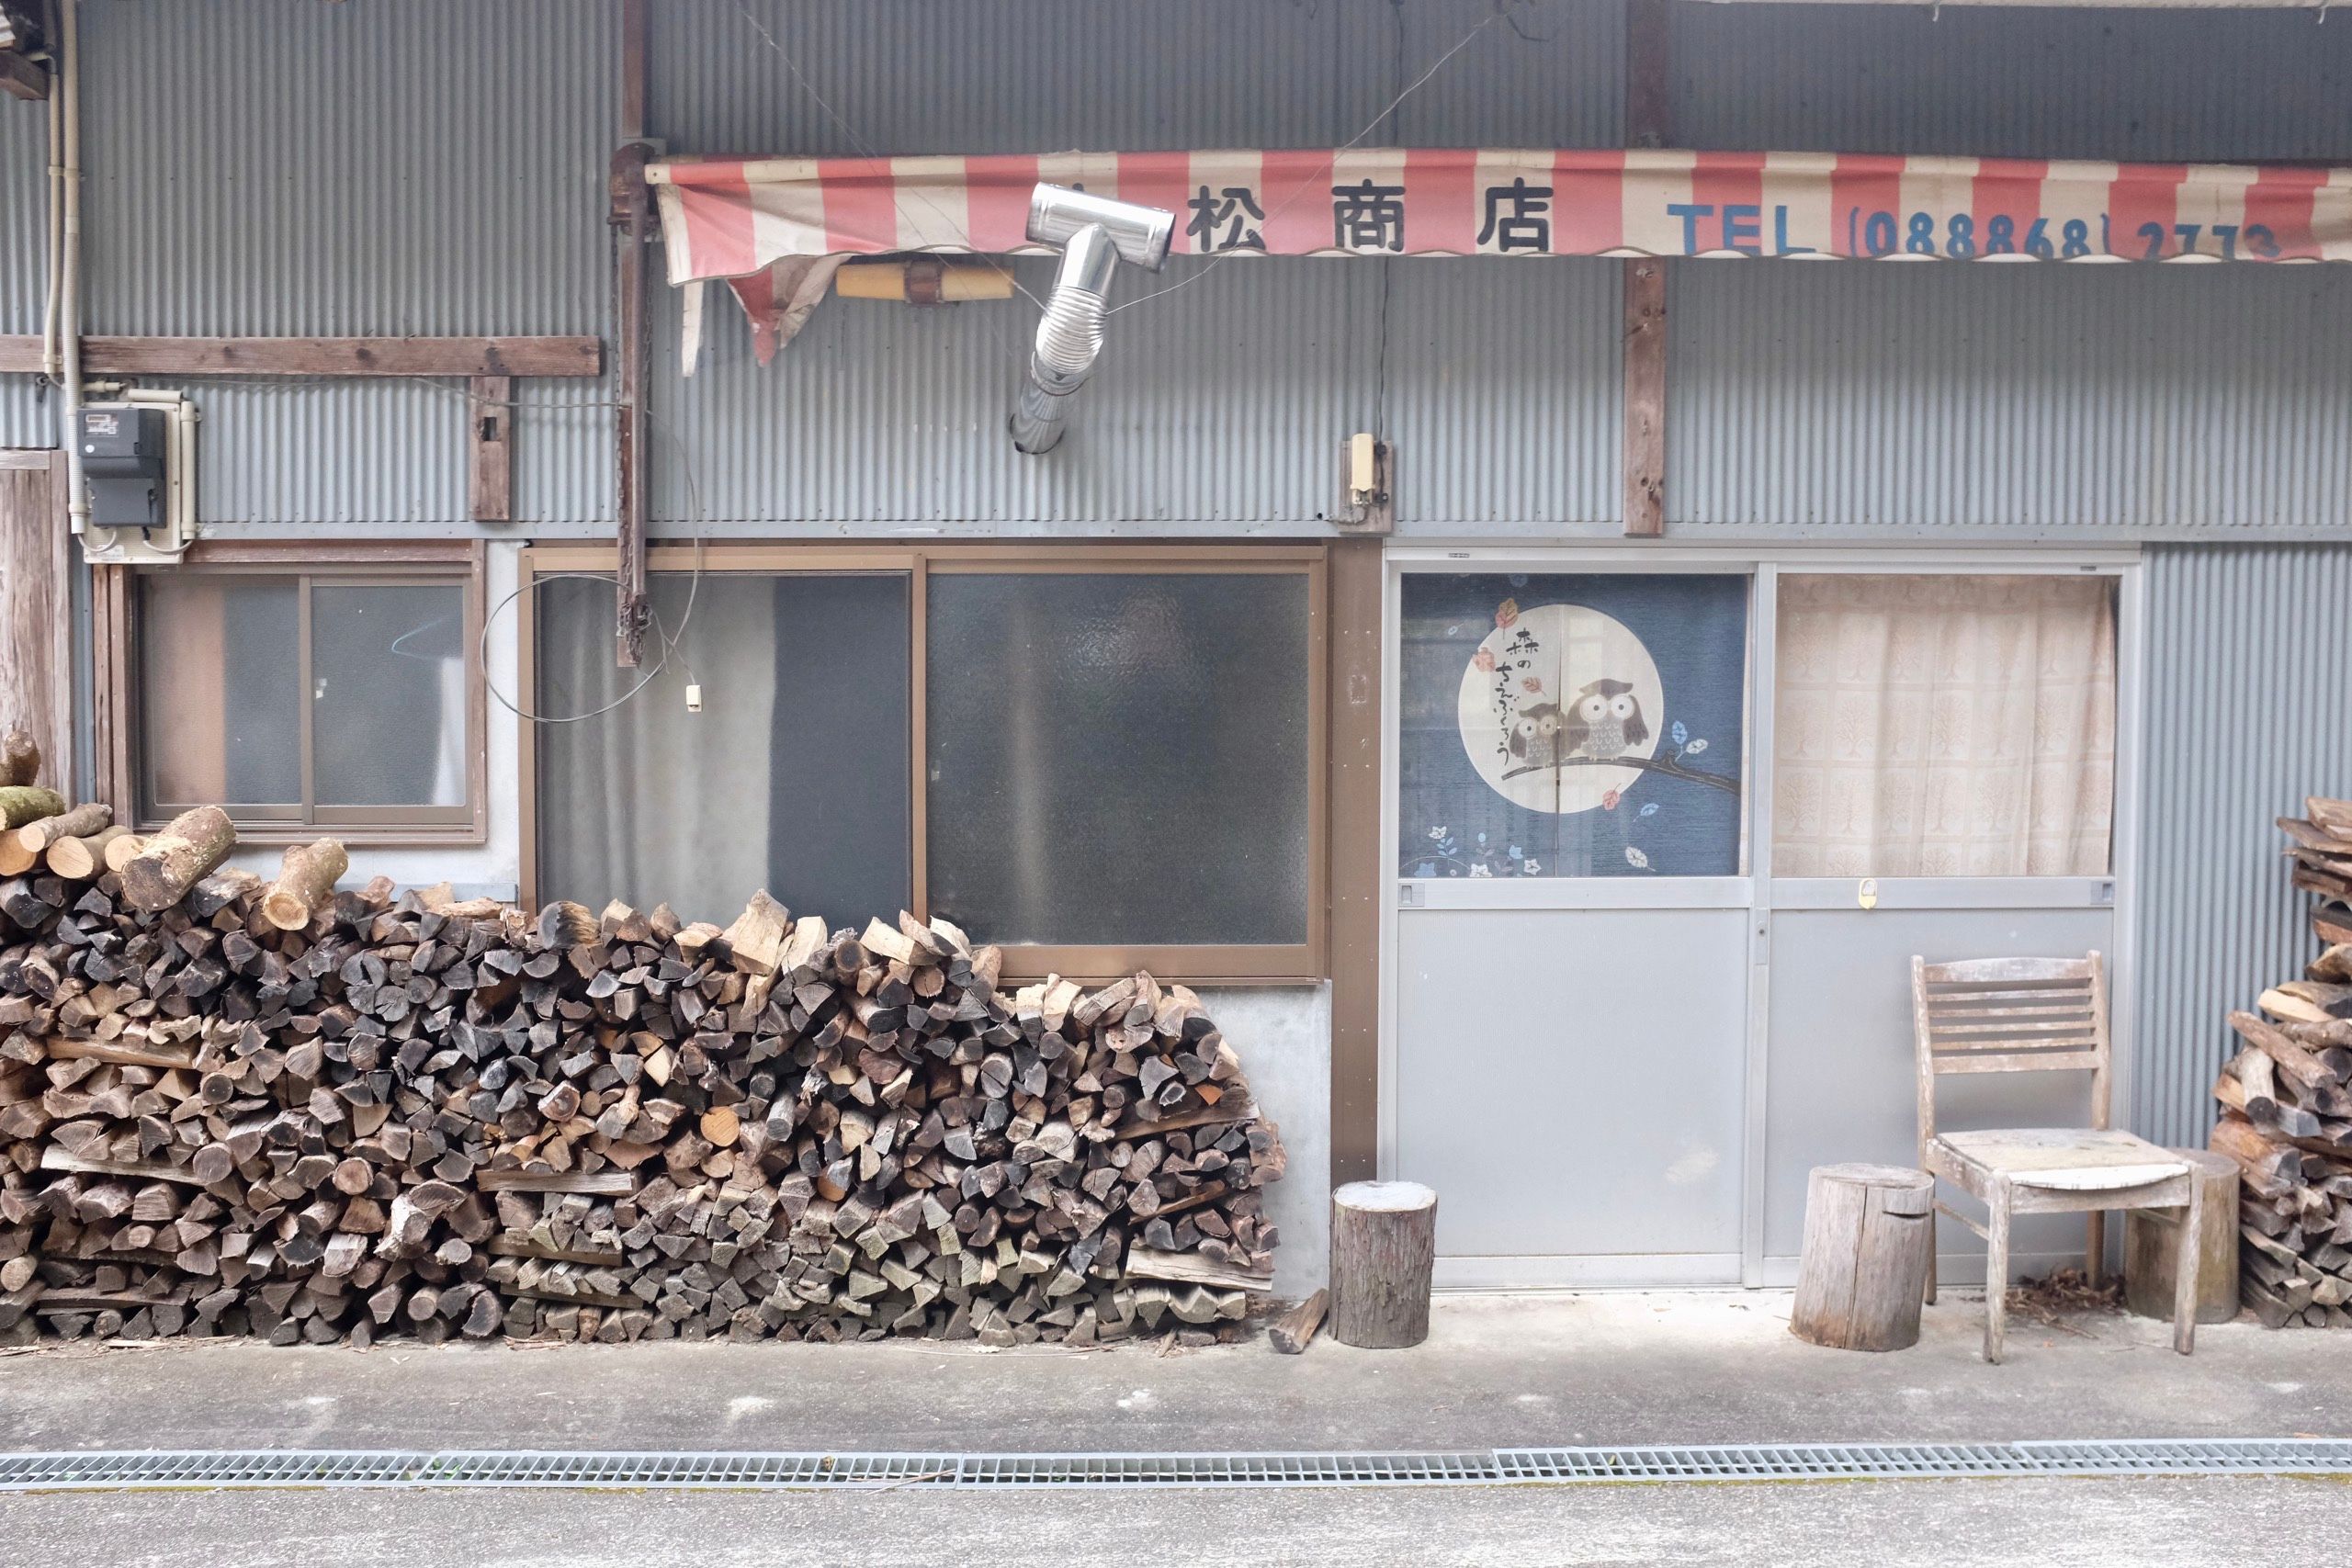 A heap of firewood in front of a shop.